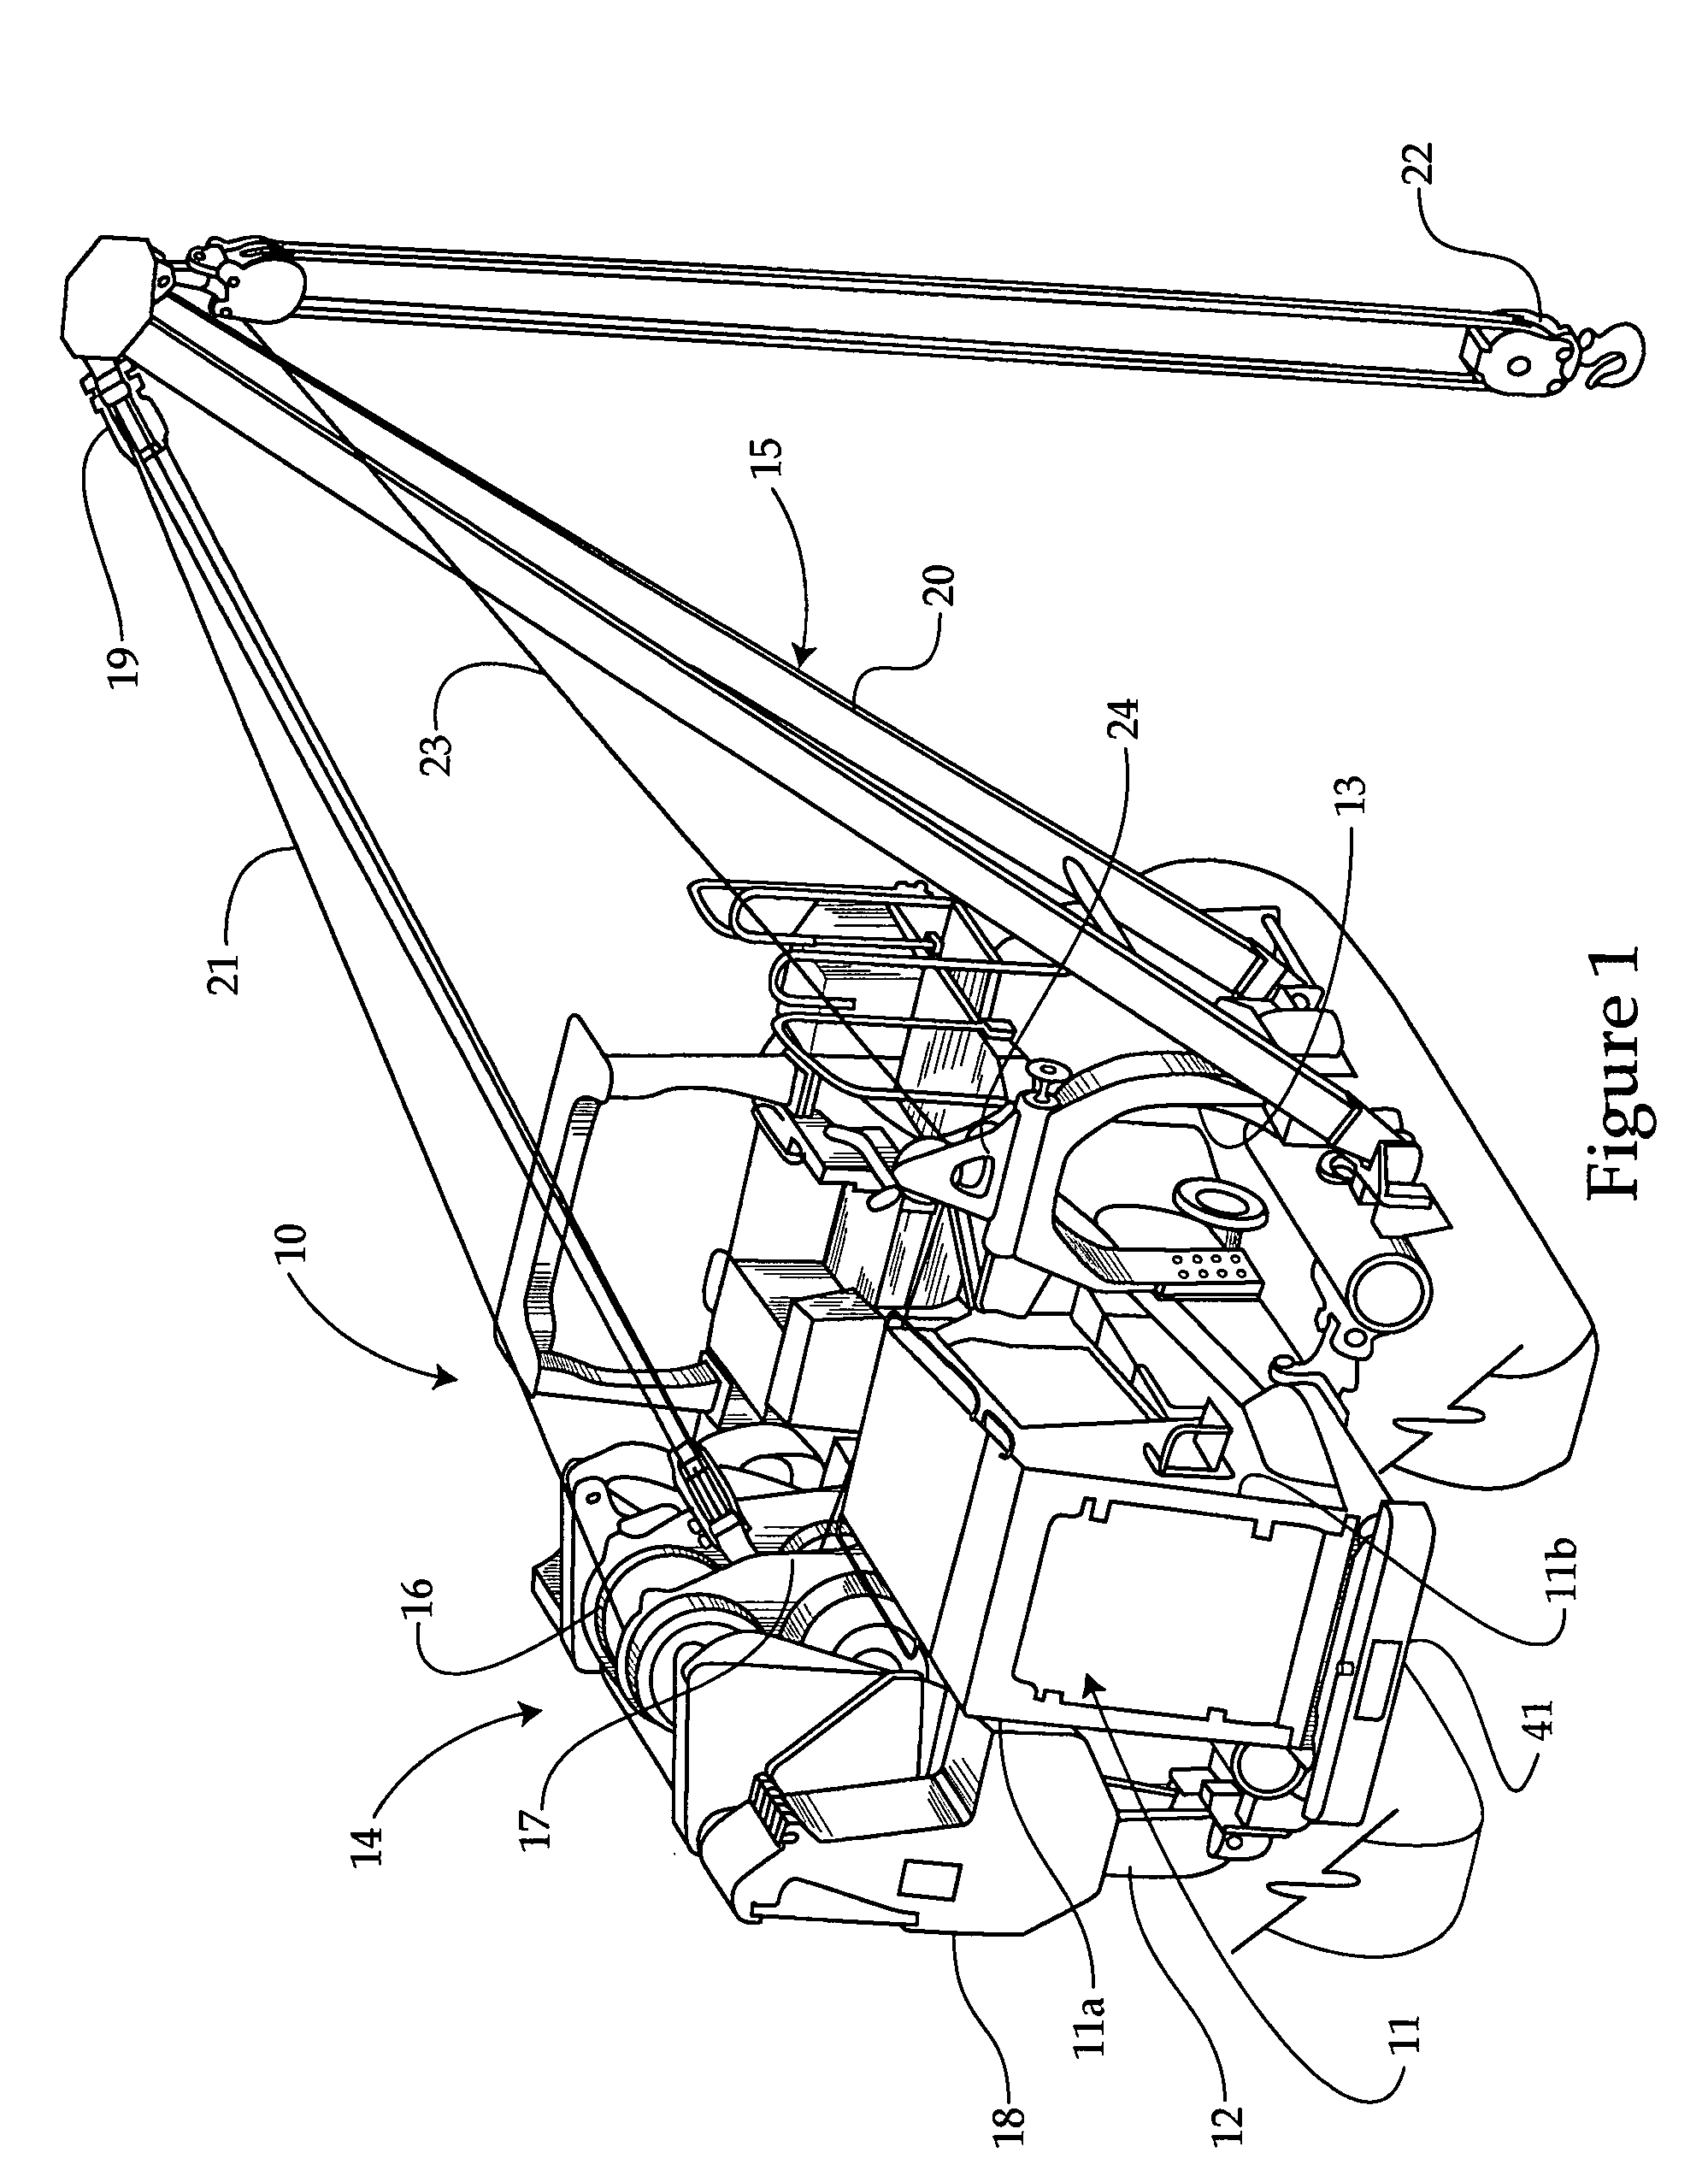 Pipelayer subframe and work machine with same